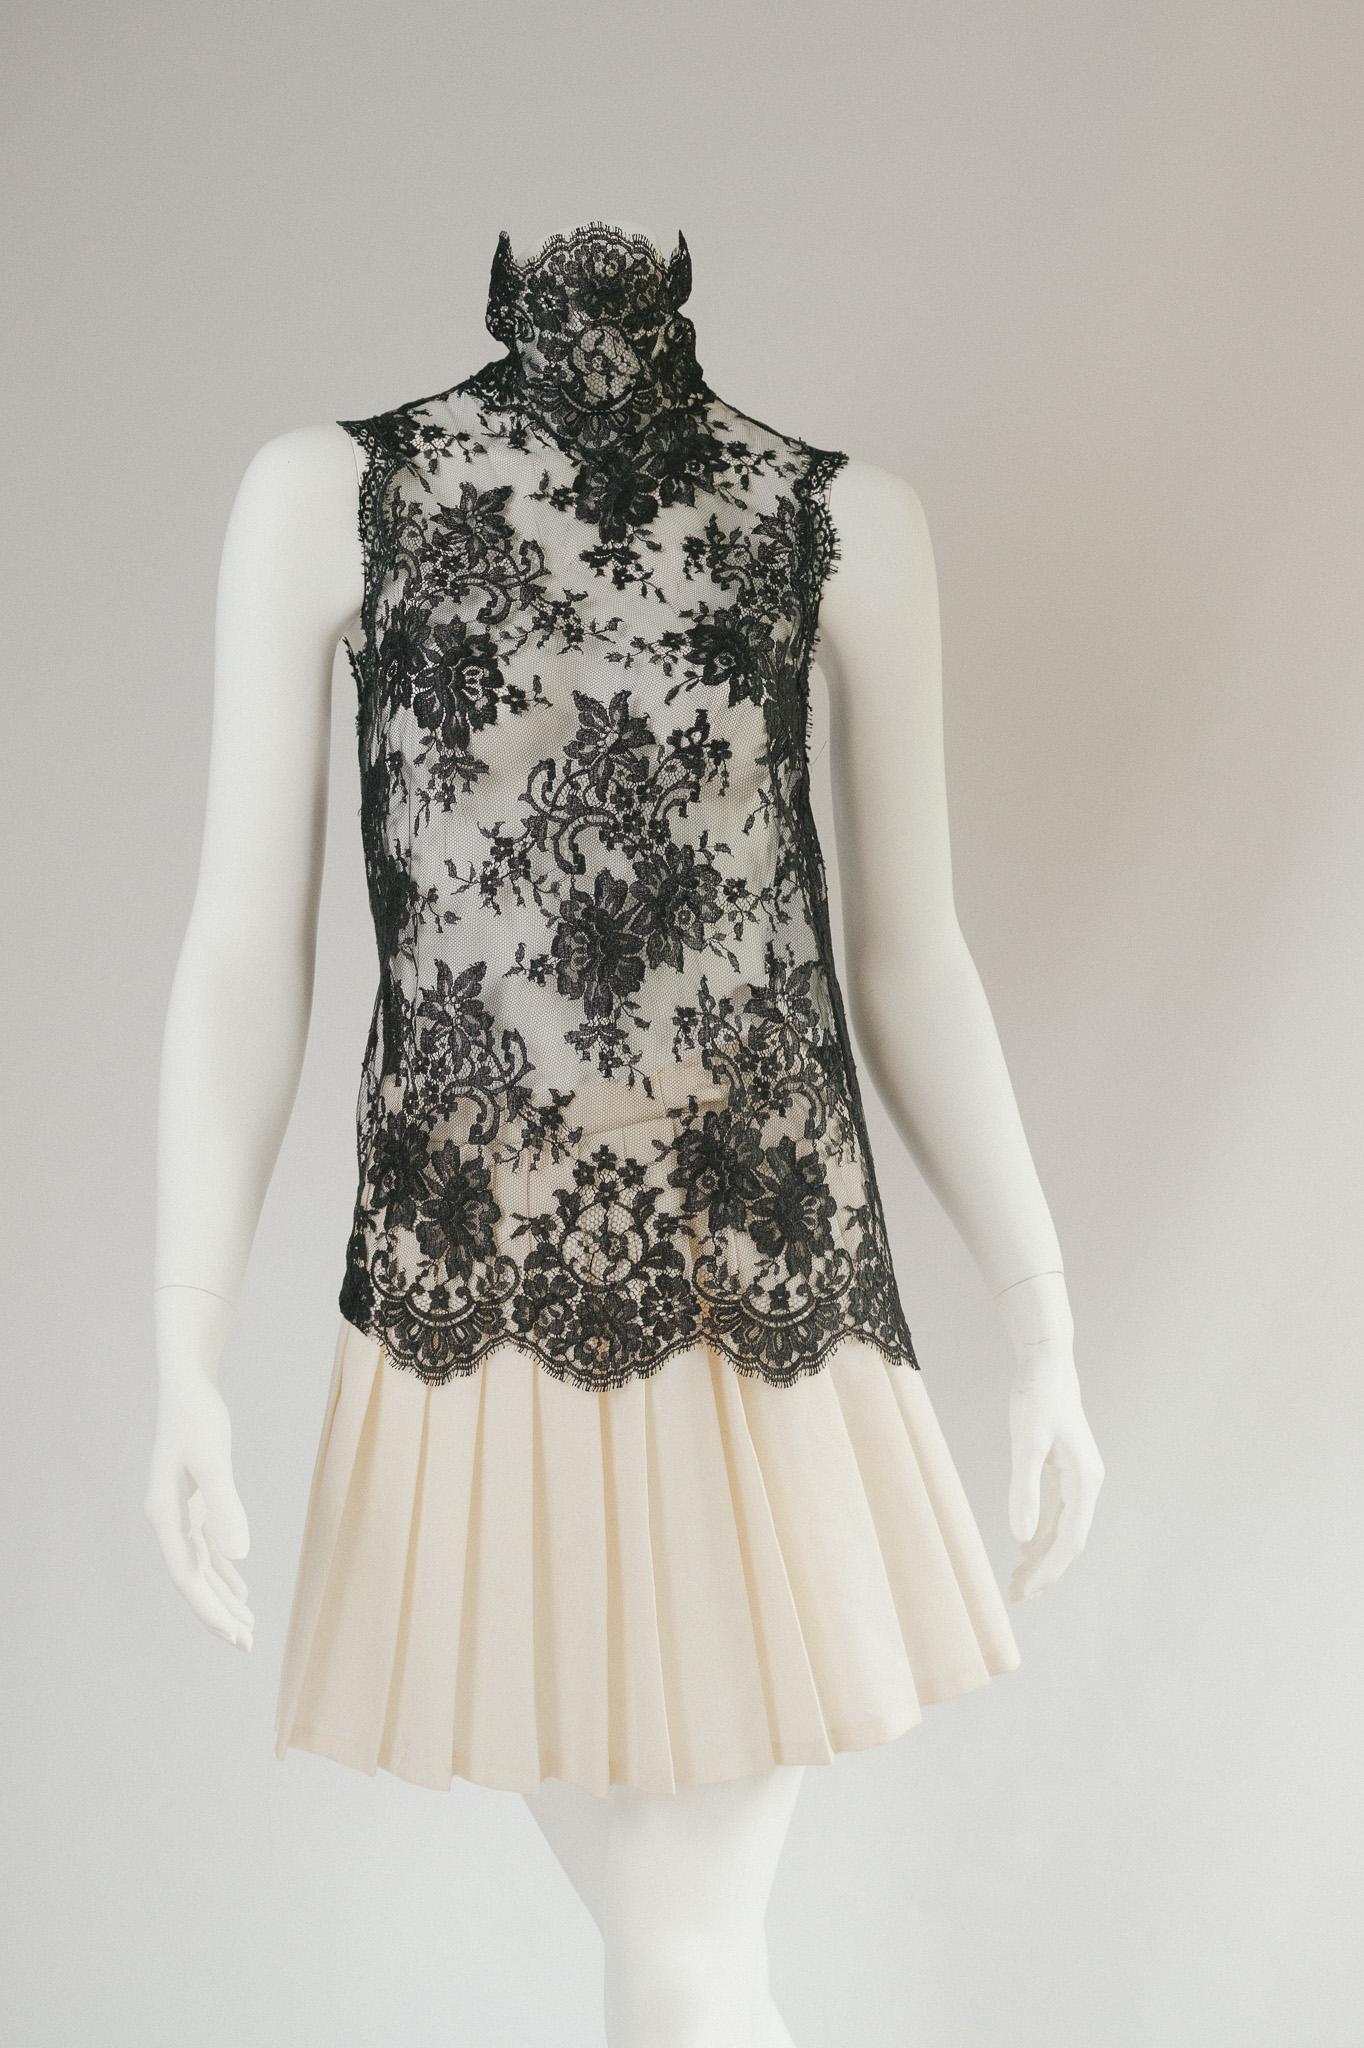 DOLCE & GABBANA FW 2001 lace turtle neck top dress. This beautiful lace was featured throughout the runway in various colours and styles - can also be worn as a dress over stockings but is VERY short . 

Original tags still attached never worn